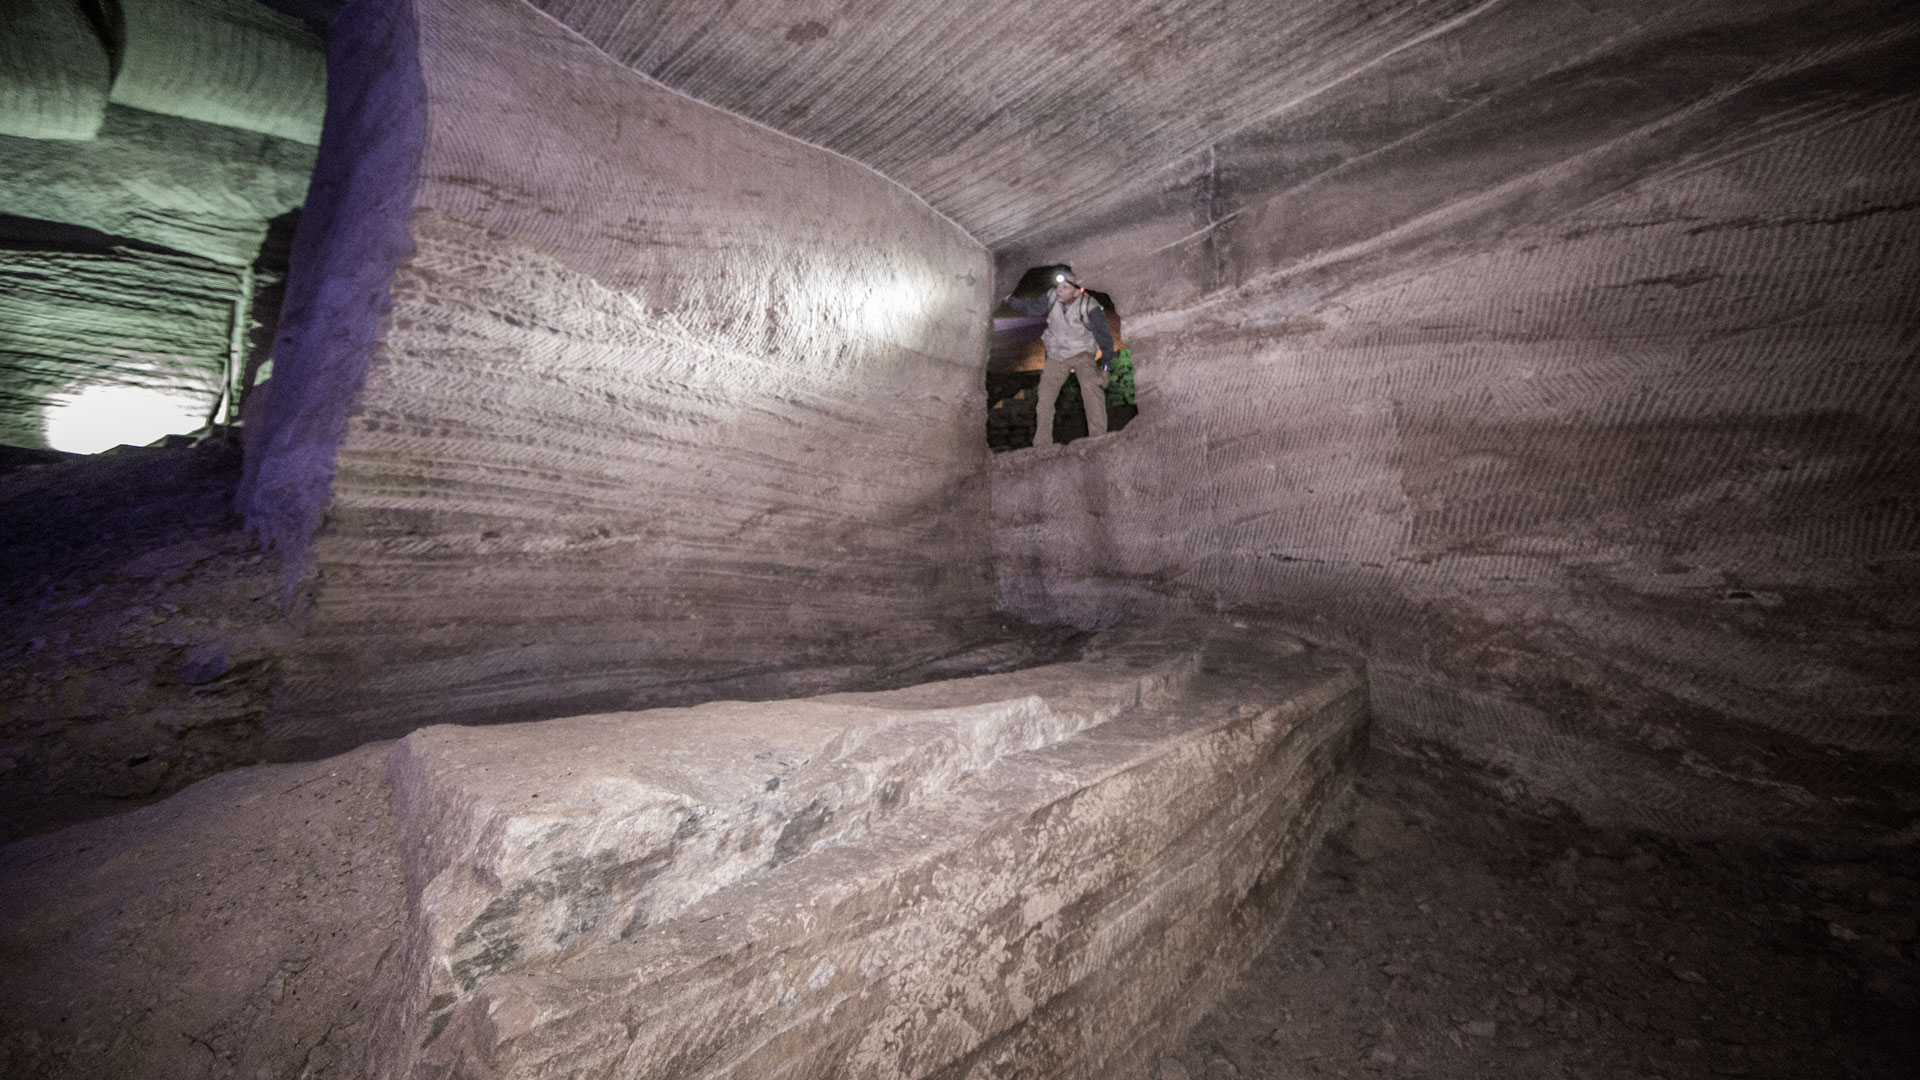 China Grotto Huang Shan (Blumenberg): Gregor Spörri explores a world whose architecture seems to be based on no logic.